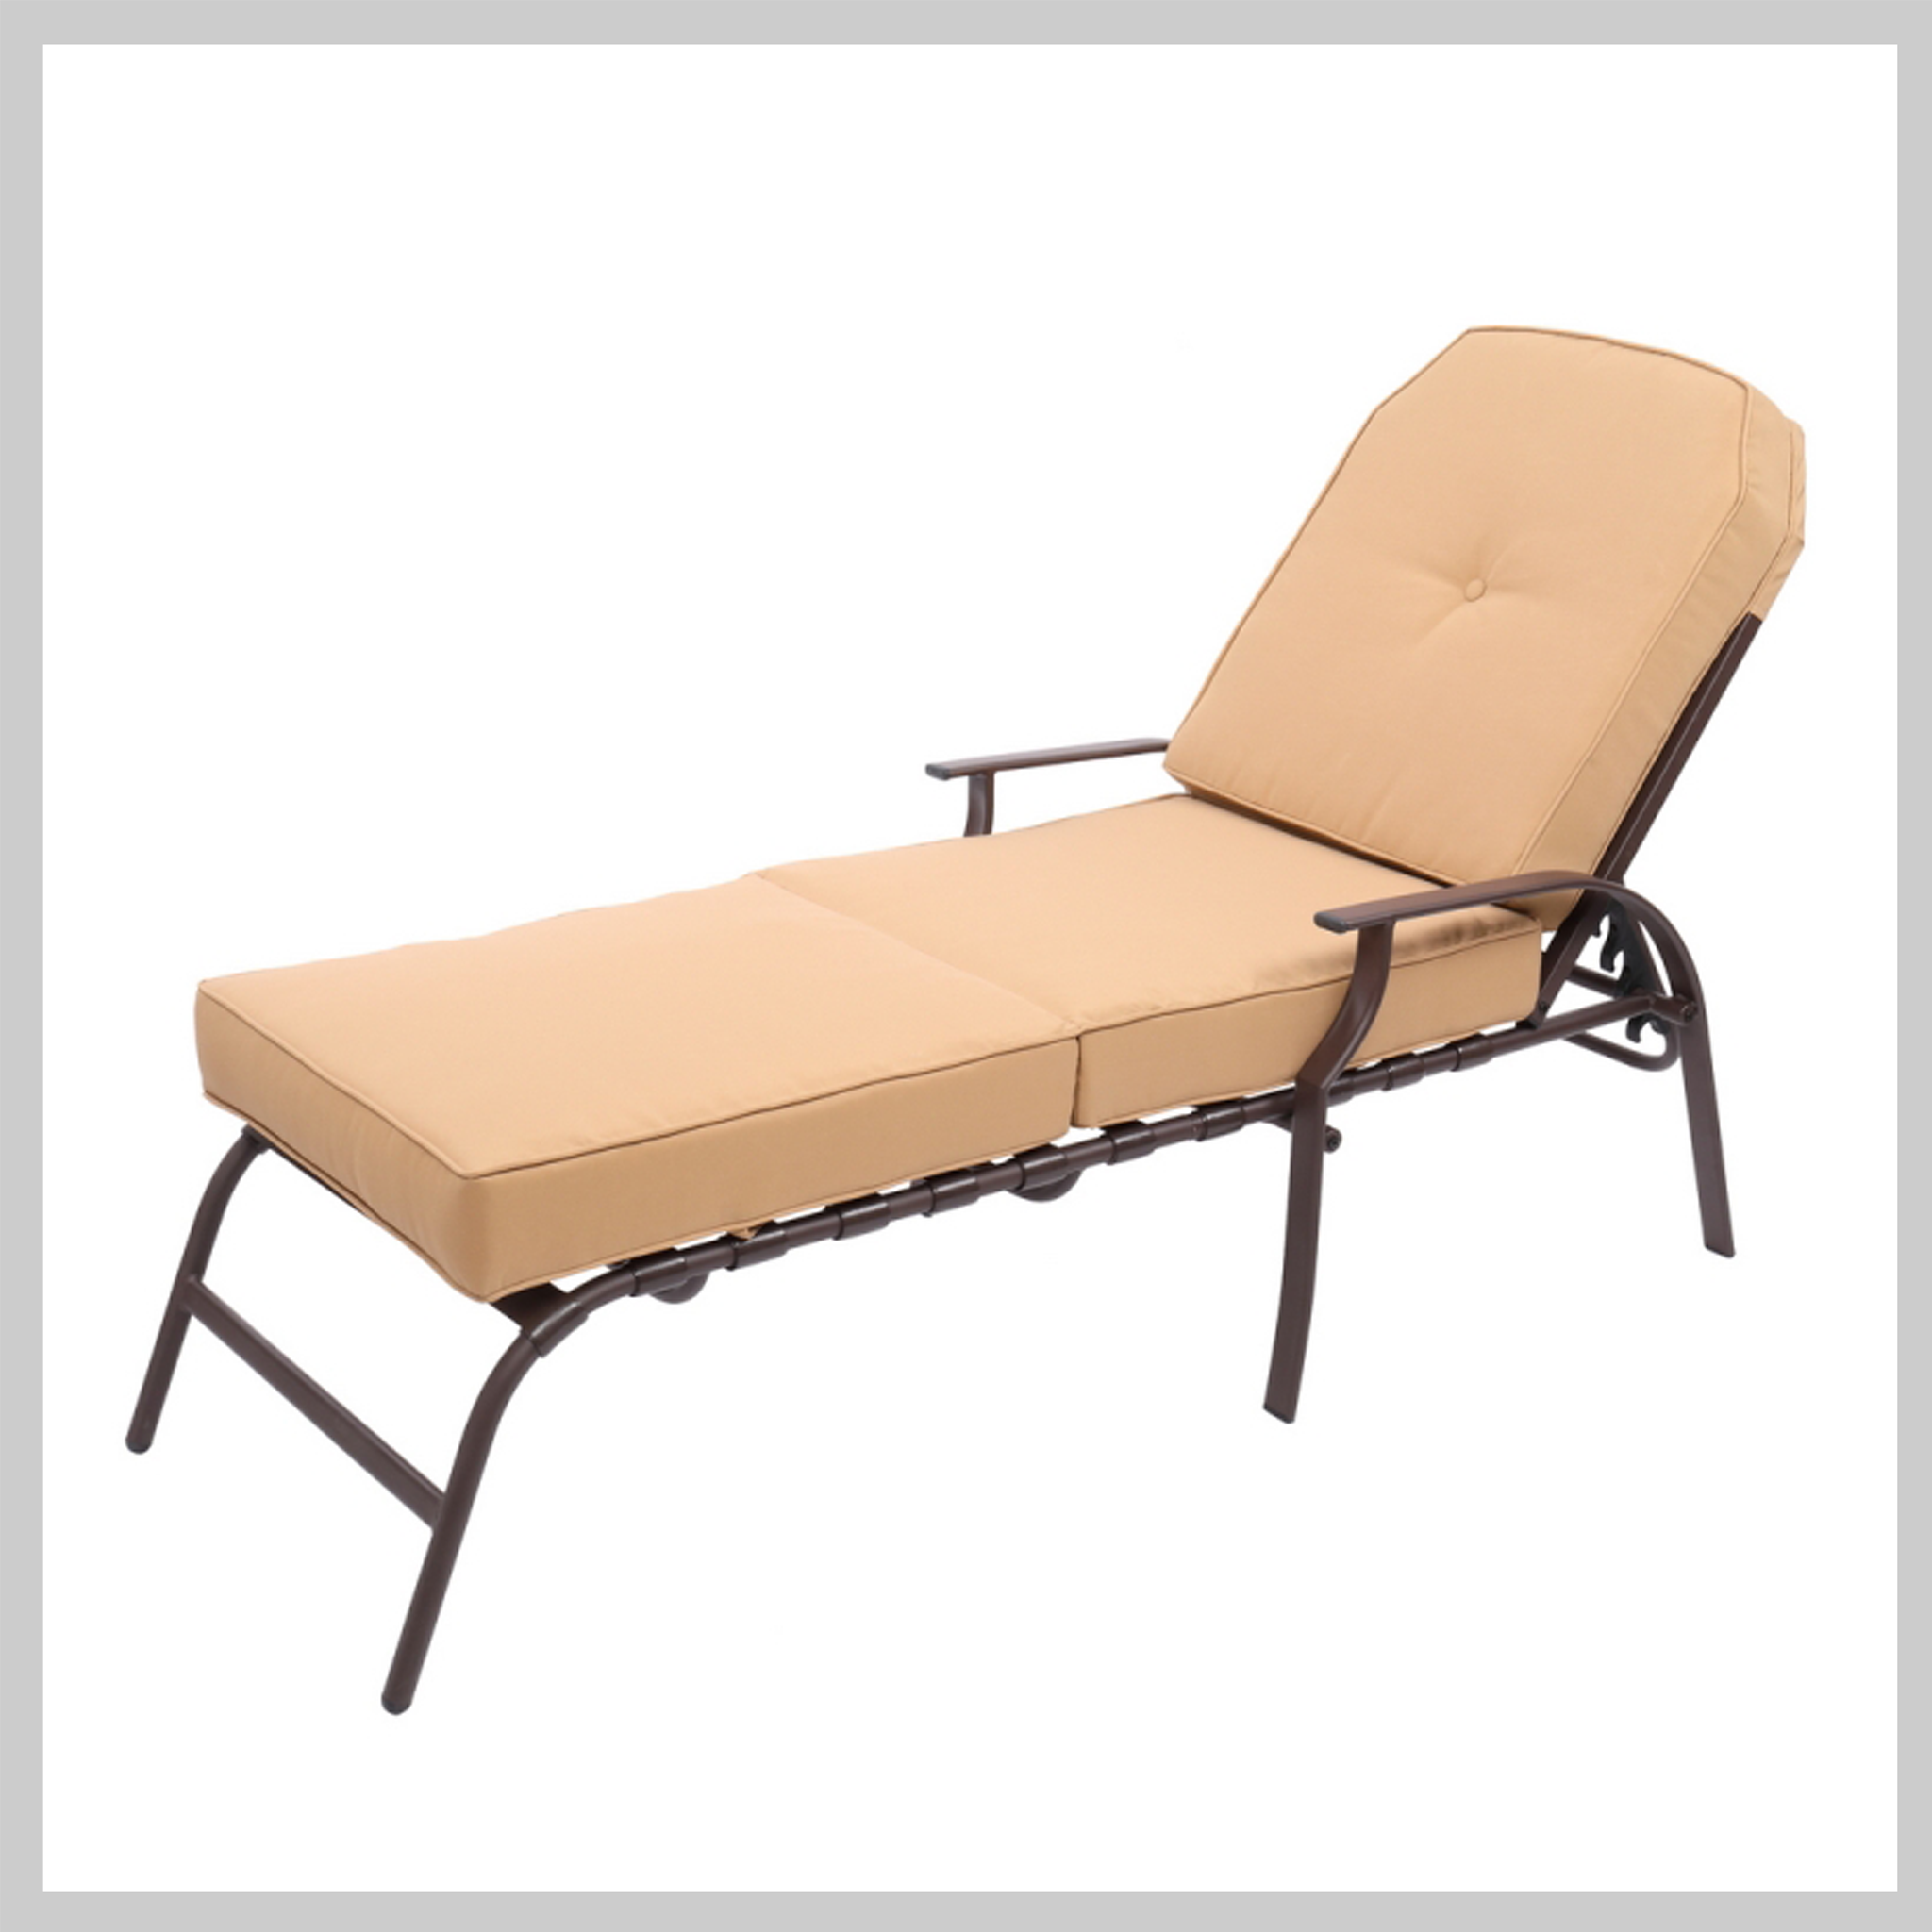 Adjustable Outdoor Steel Patio Chaise Lounge Chair with UV-Resistant Cushions